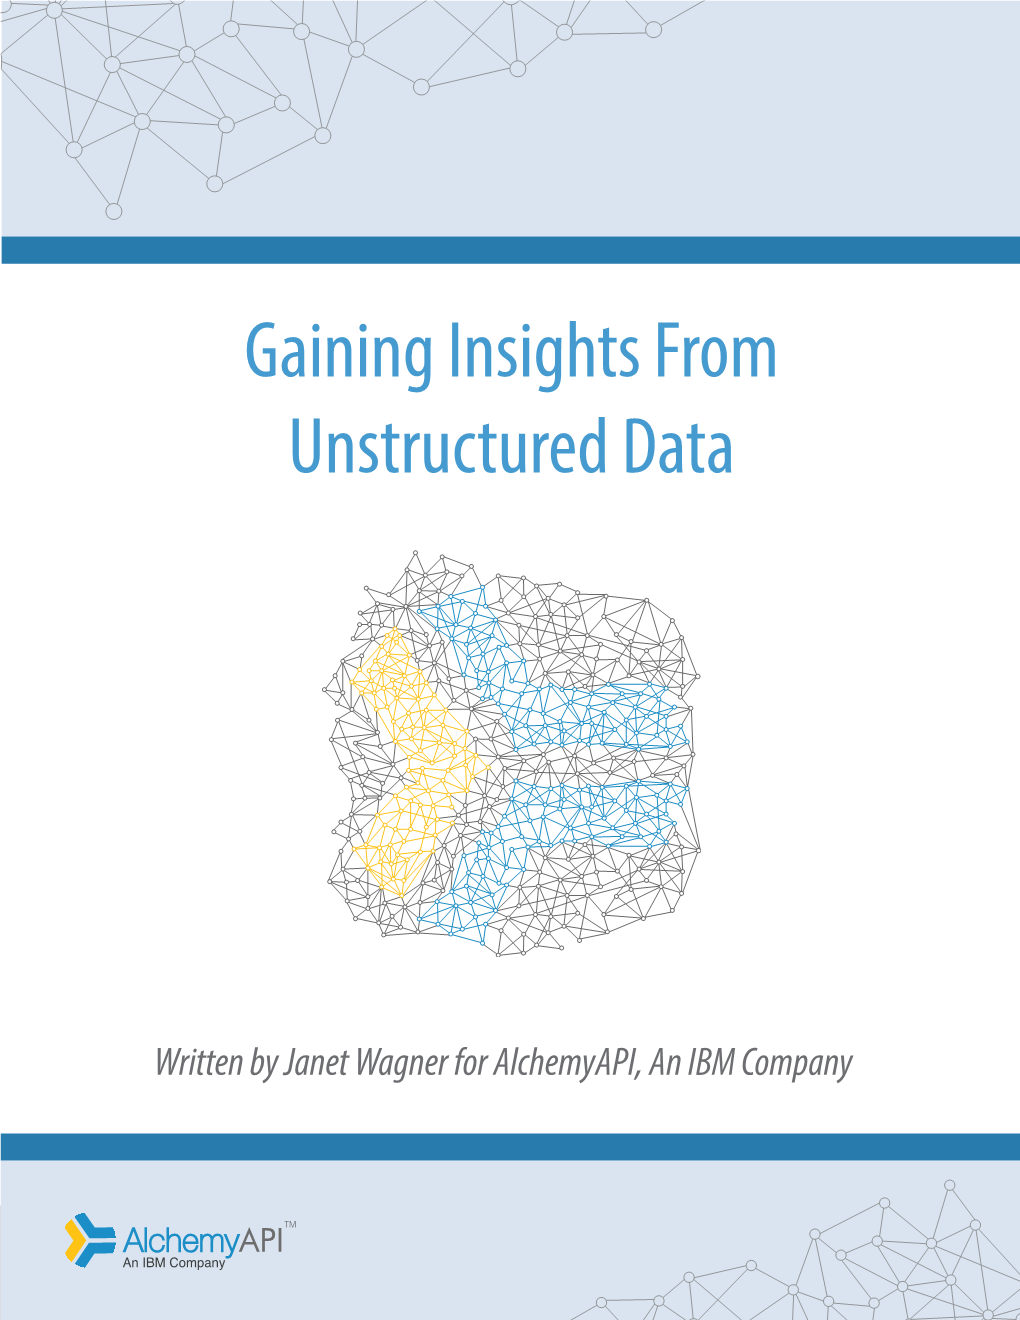 Gaining Insights from Unstructured Data